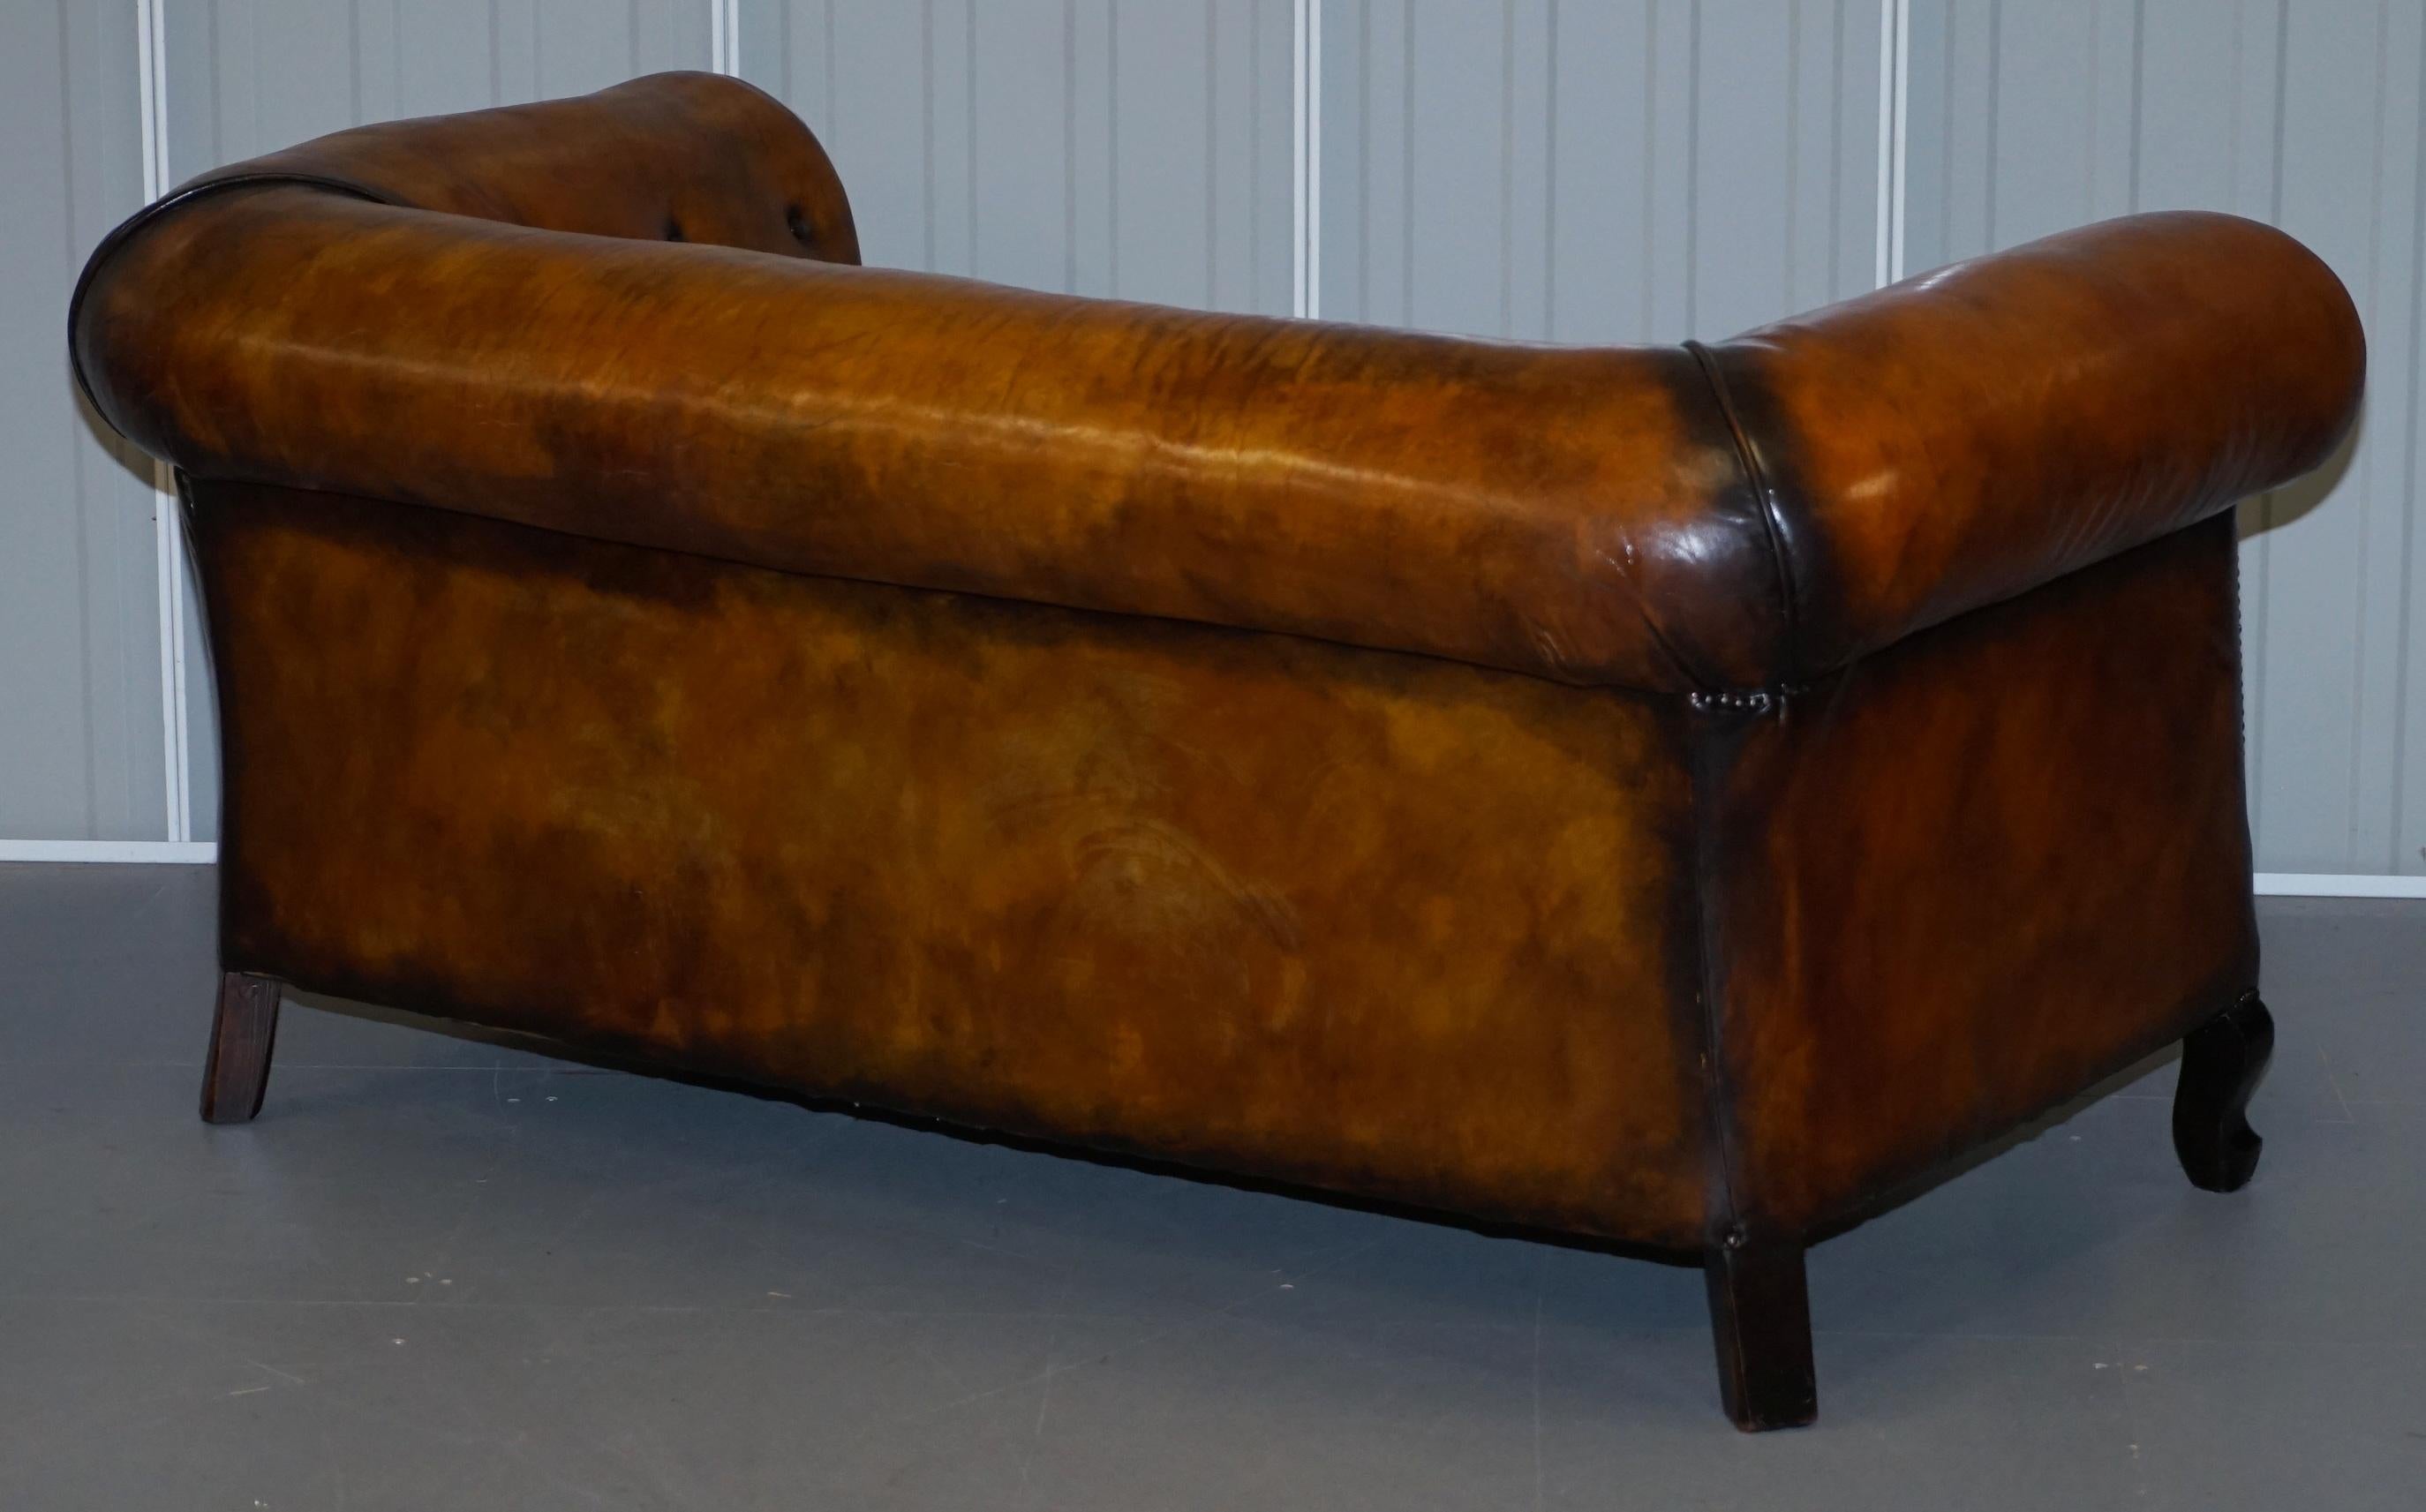 1 of 2 Restored Victorian Gentleman's Club Chesterfield Leather Sofas Kilim Seat For Sale 6